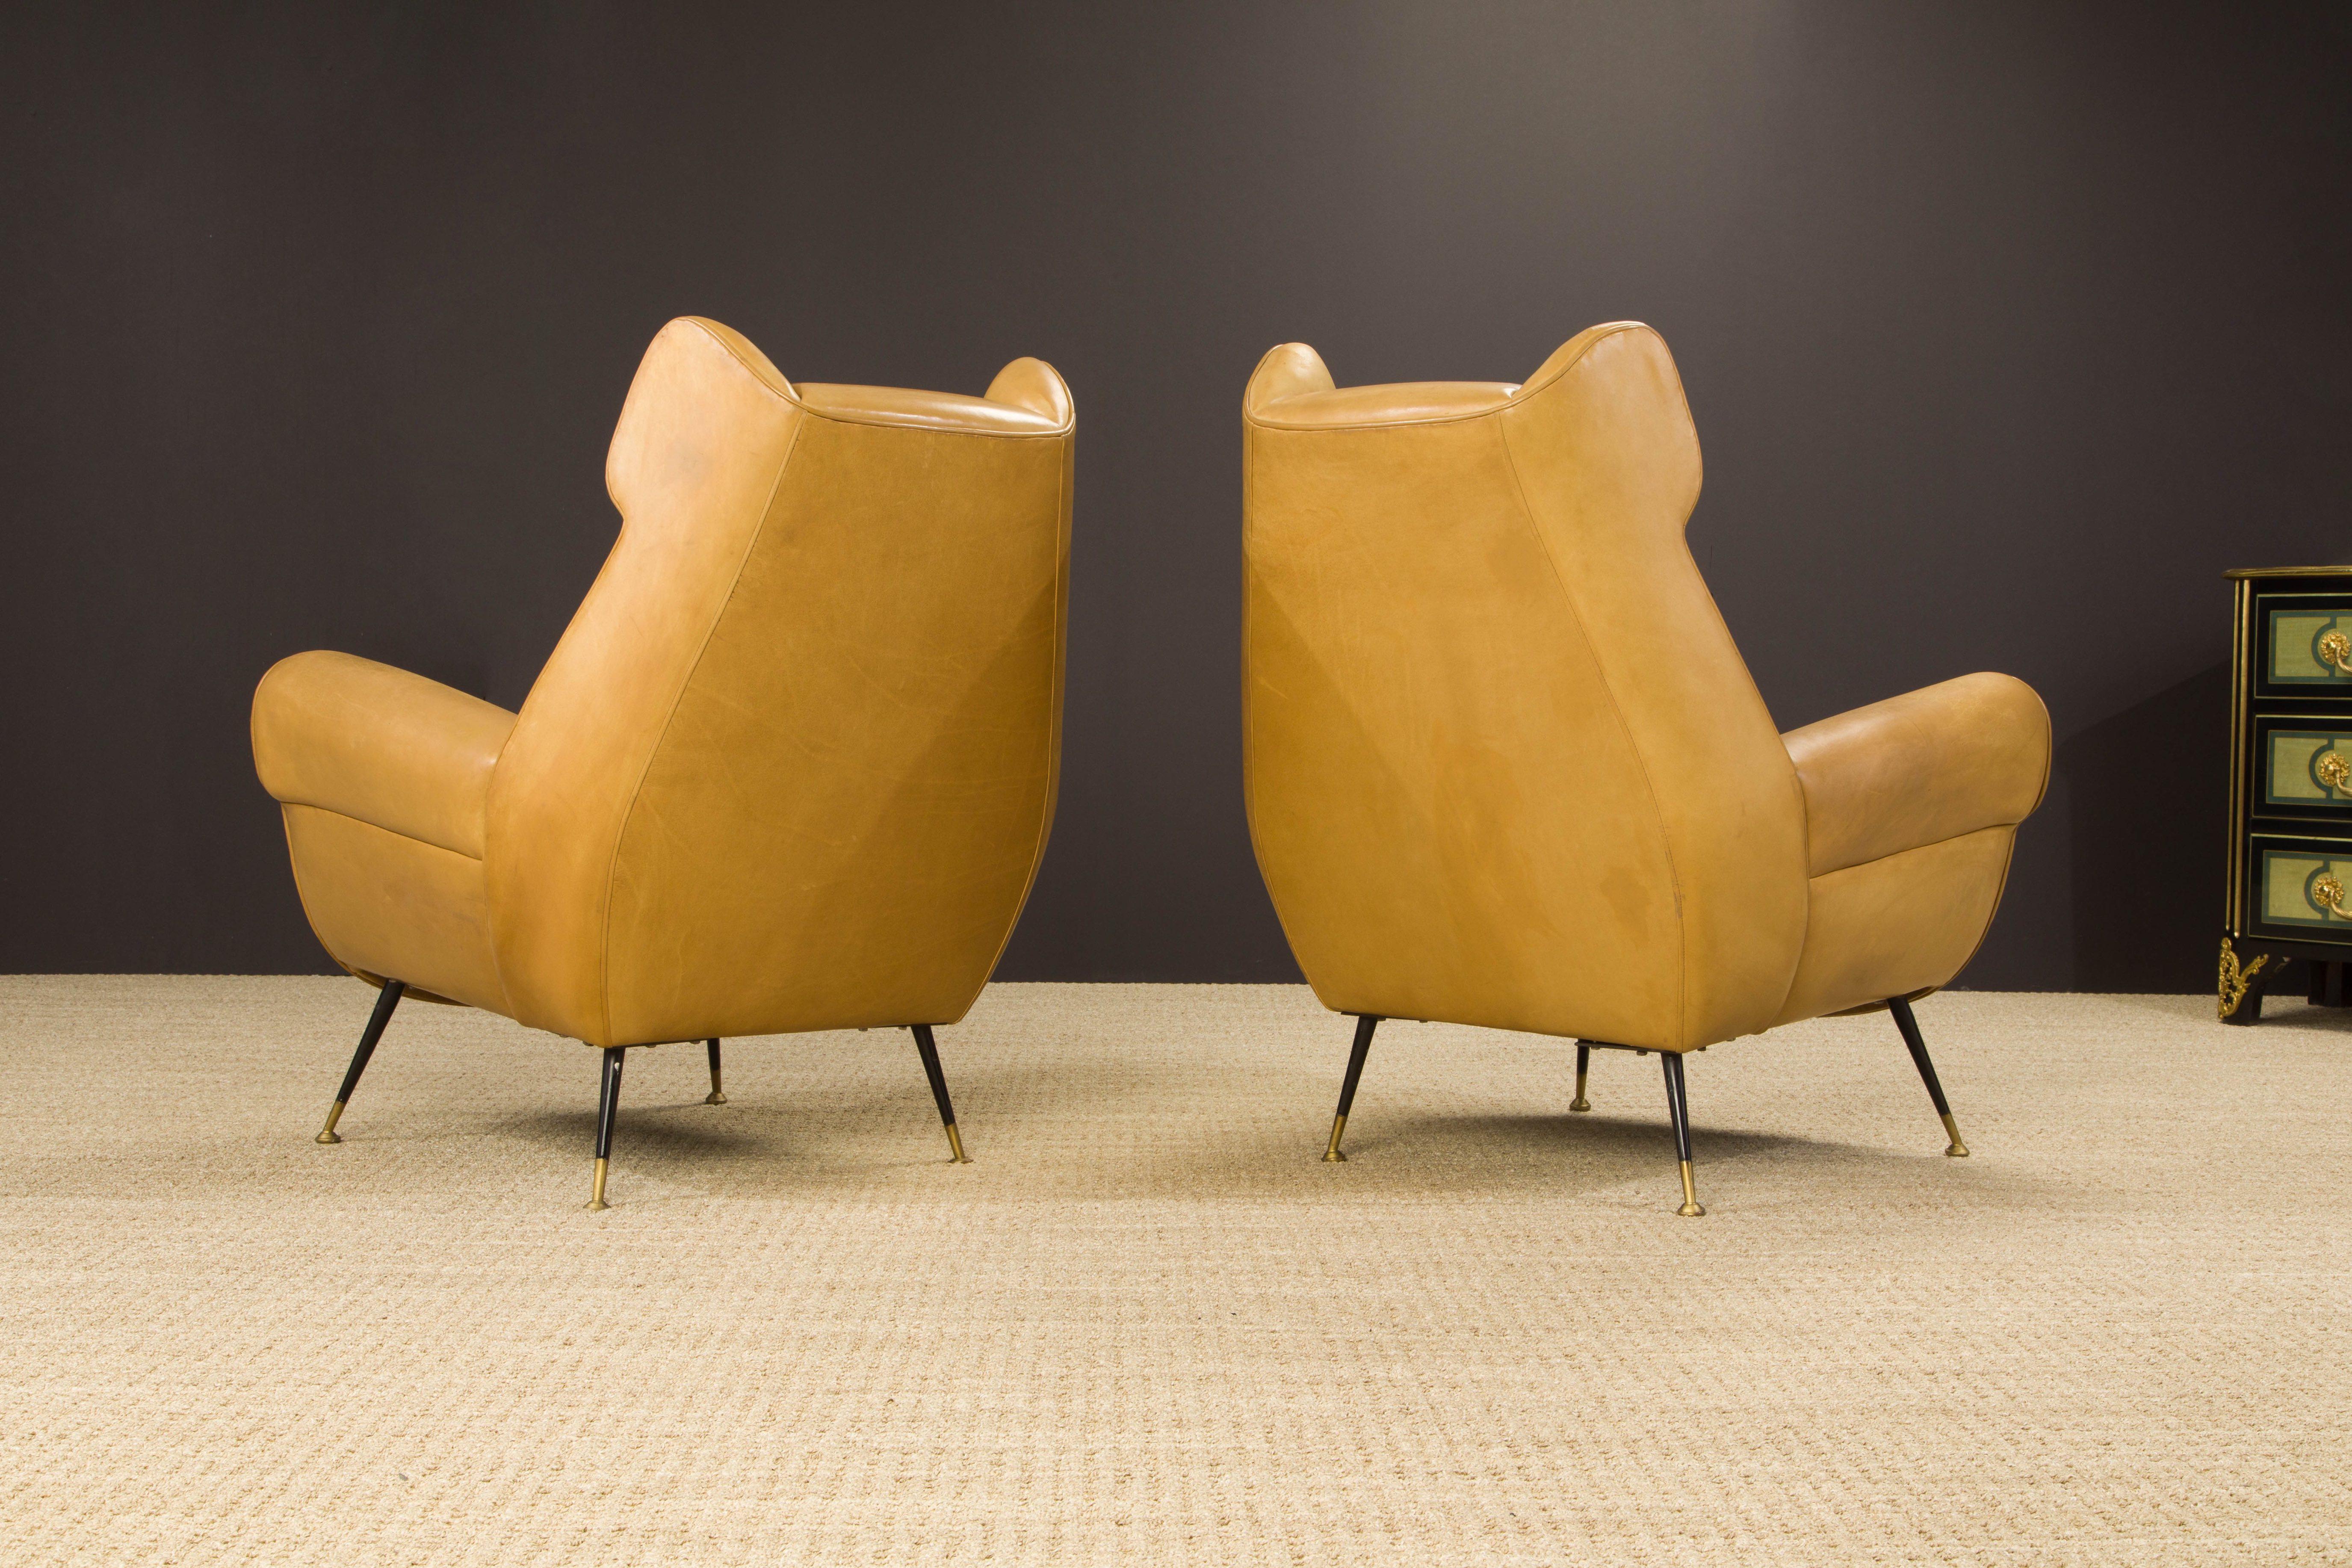 Mid-20th Century Pair of Gigi Radice for Minotti Leather Wingback Lounge Chairs, Italy, c. 1950s